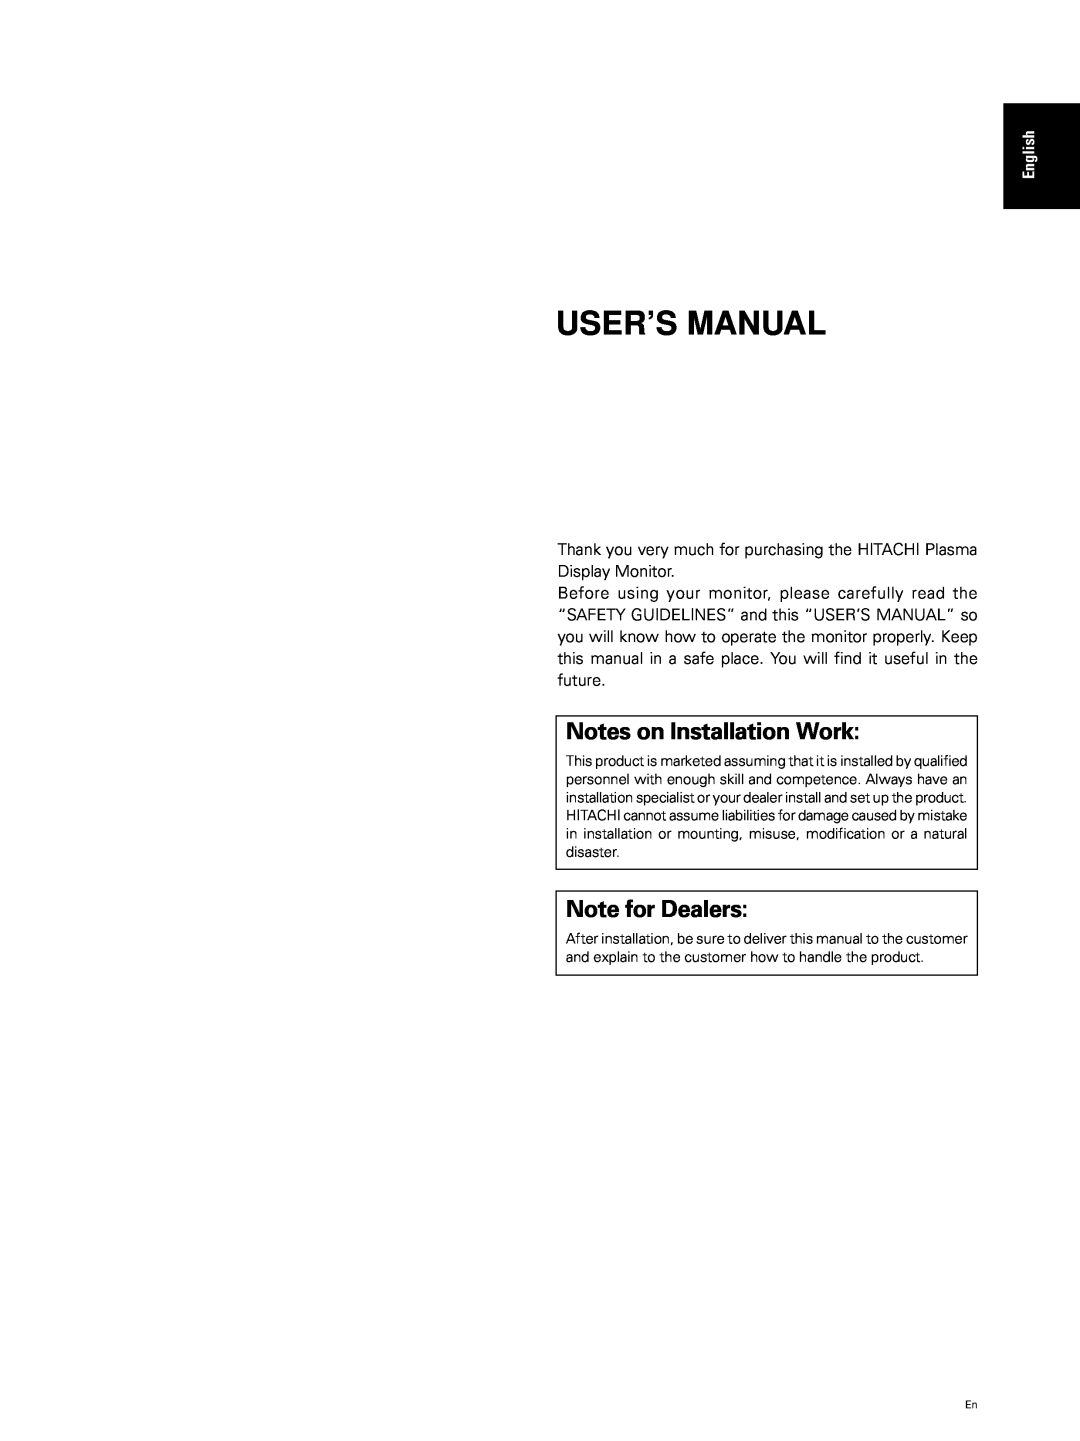 Hitachi CMP5000WXJ, CMP5000WXU user manual User’S Manual, Notes on Installation Work, Note for Dealers 